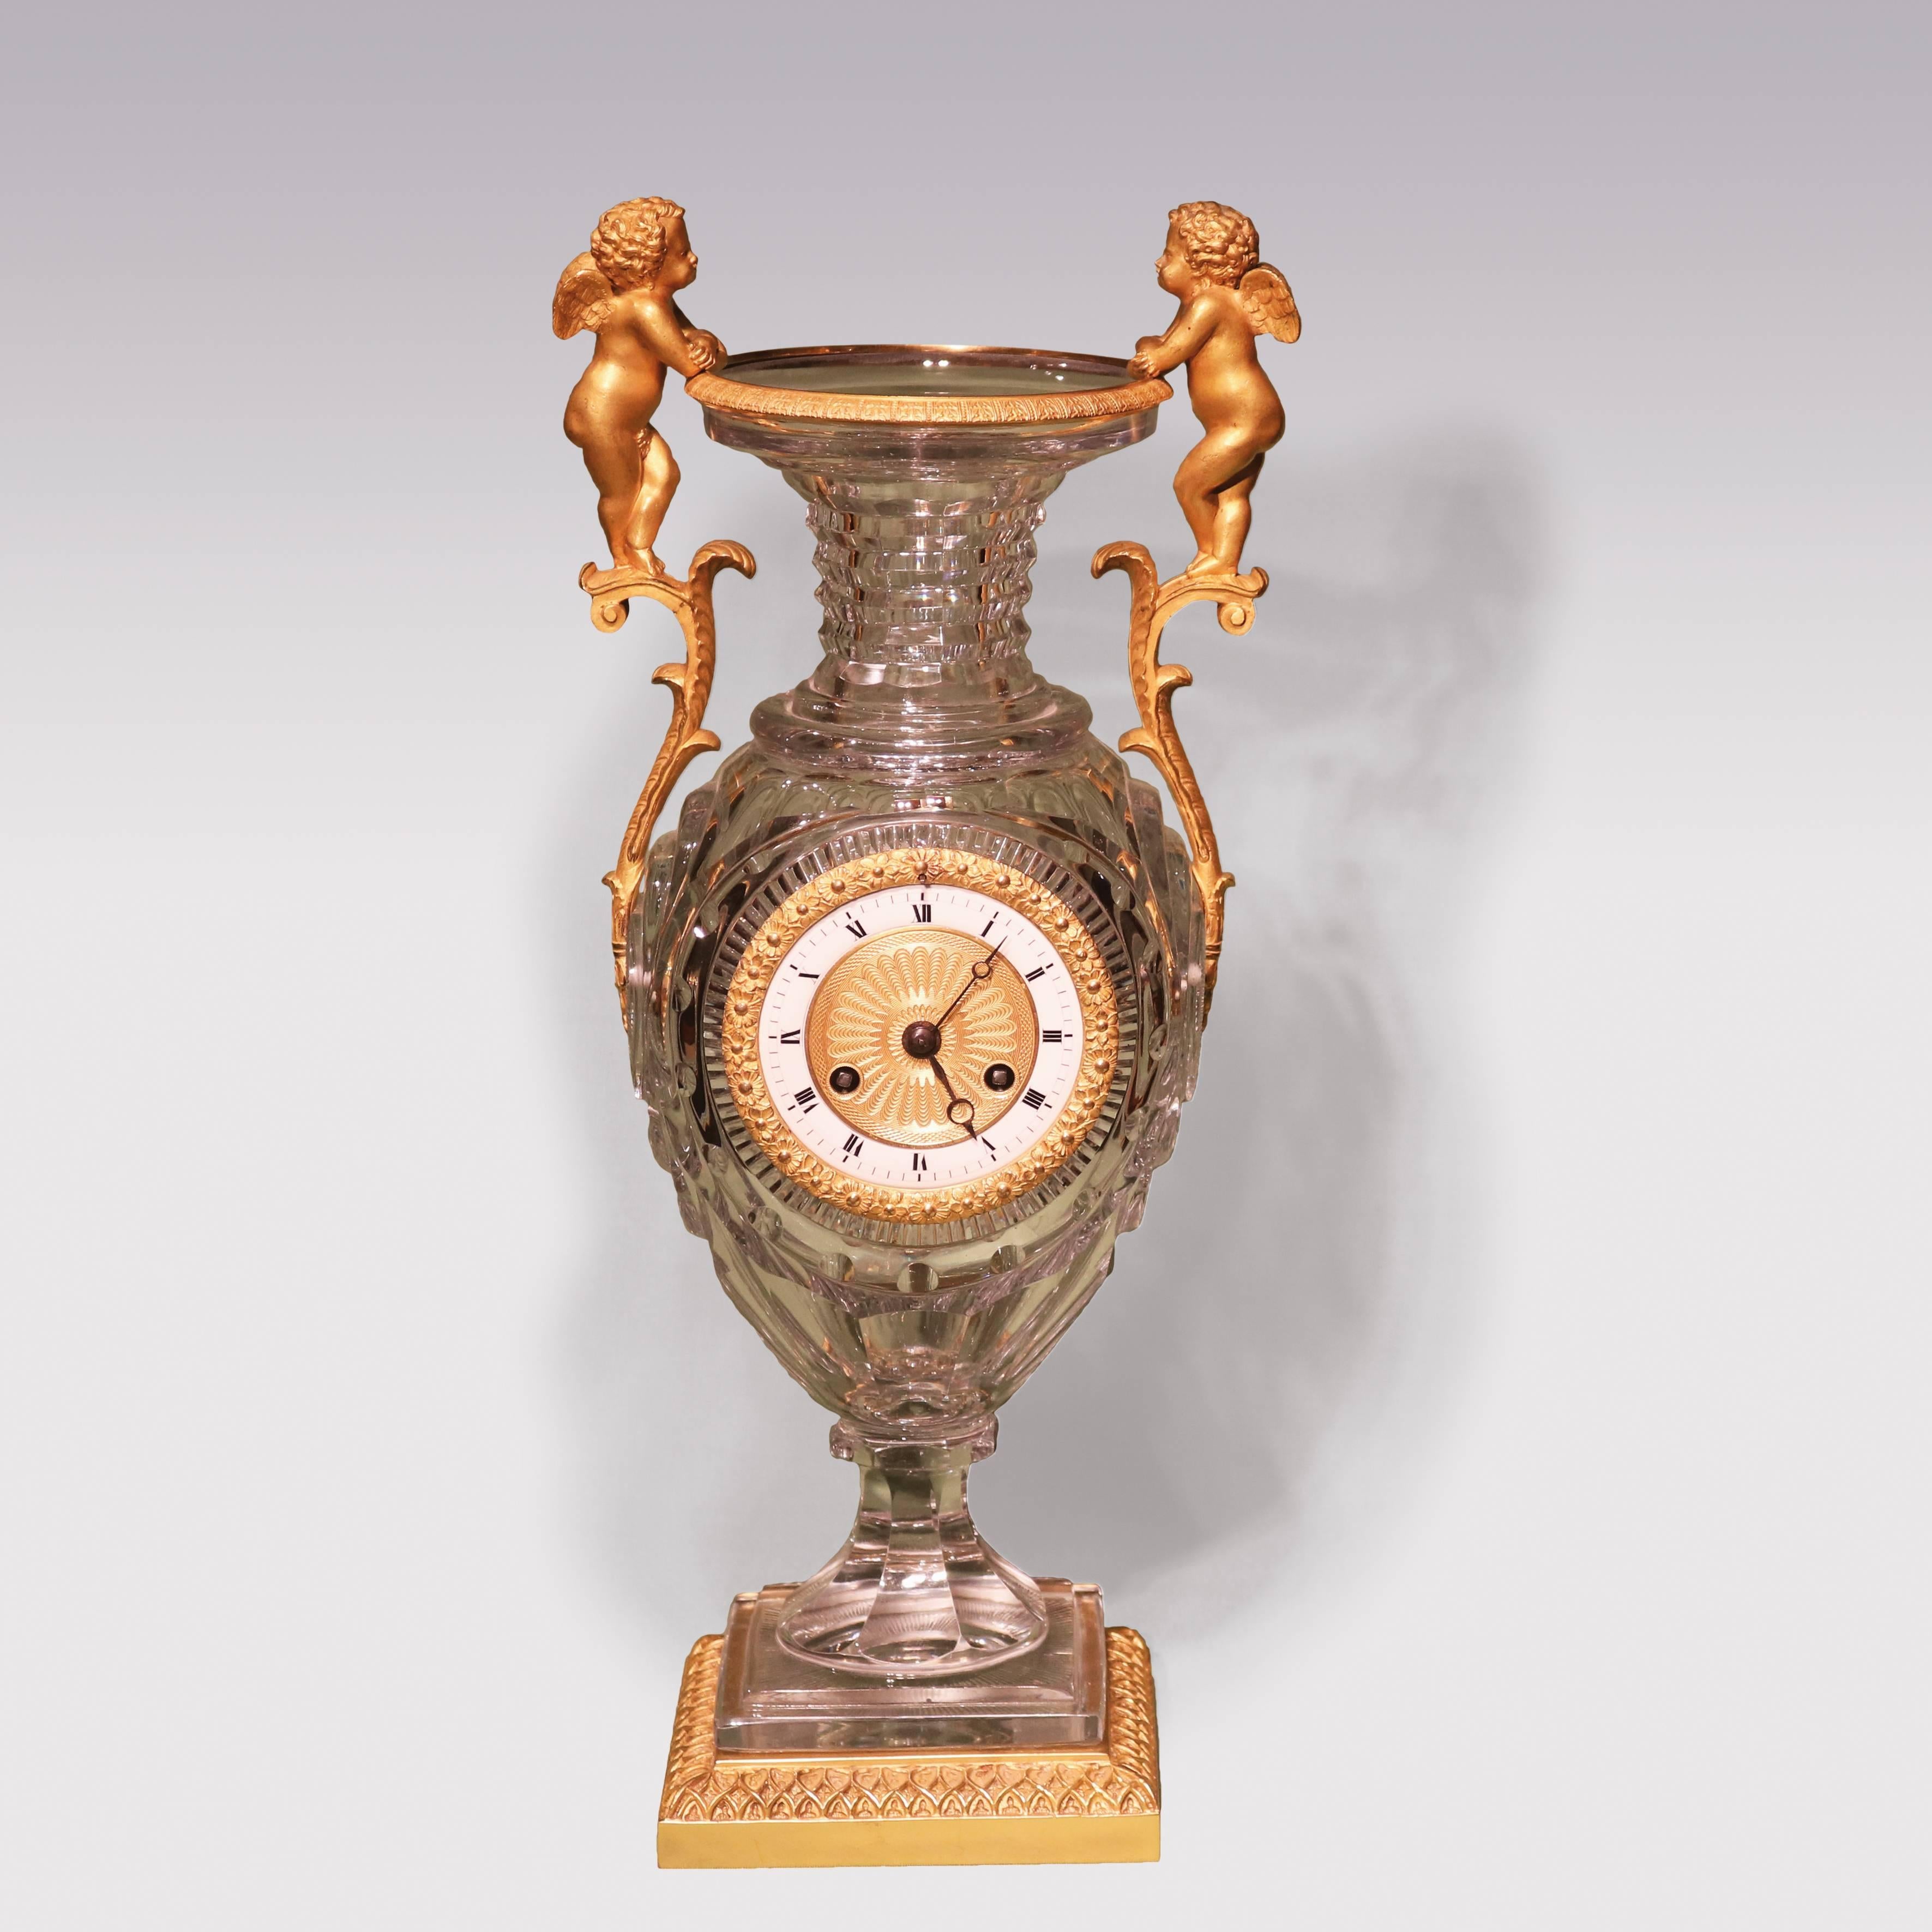 An early 19th century French Clock, having enameled dial 8-day striking movement, contained in unusual faceted glass urn with ormolu rim and cherub scroll handles, ending on square plinth base with ormolu border.